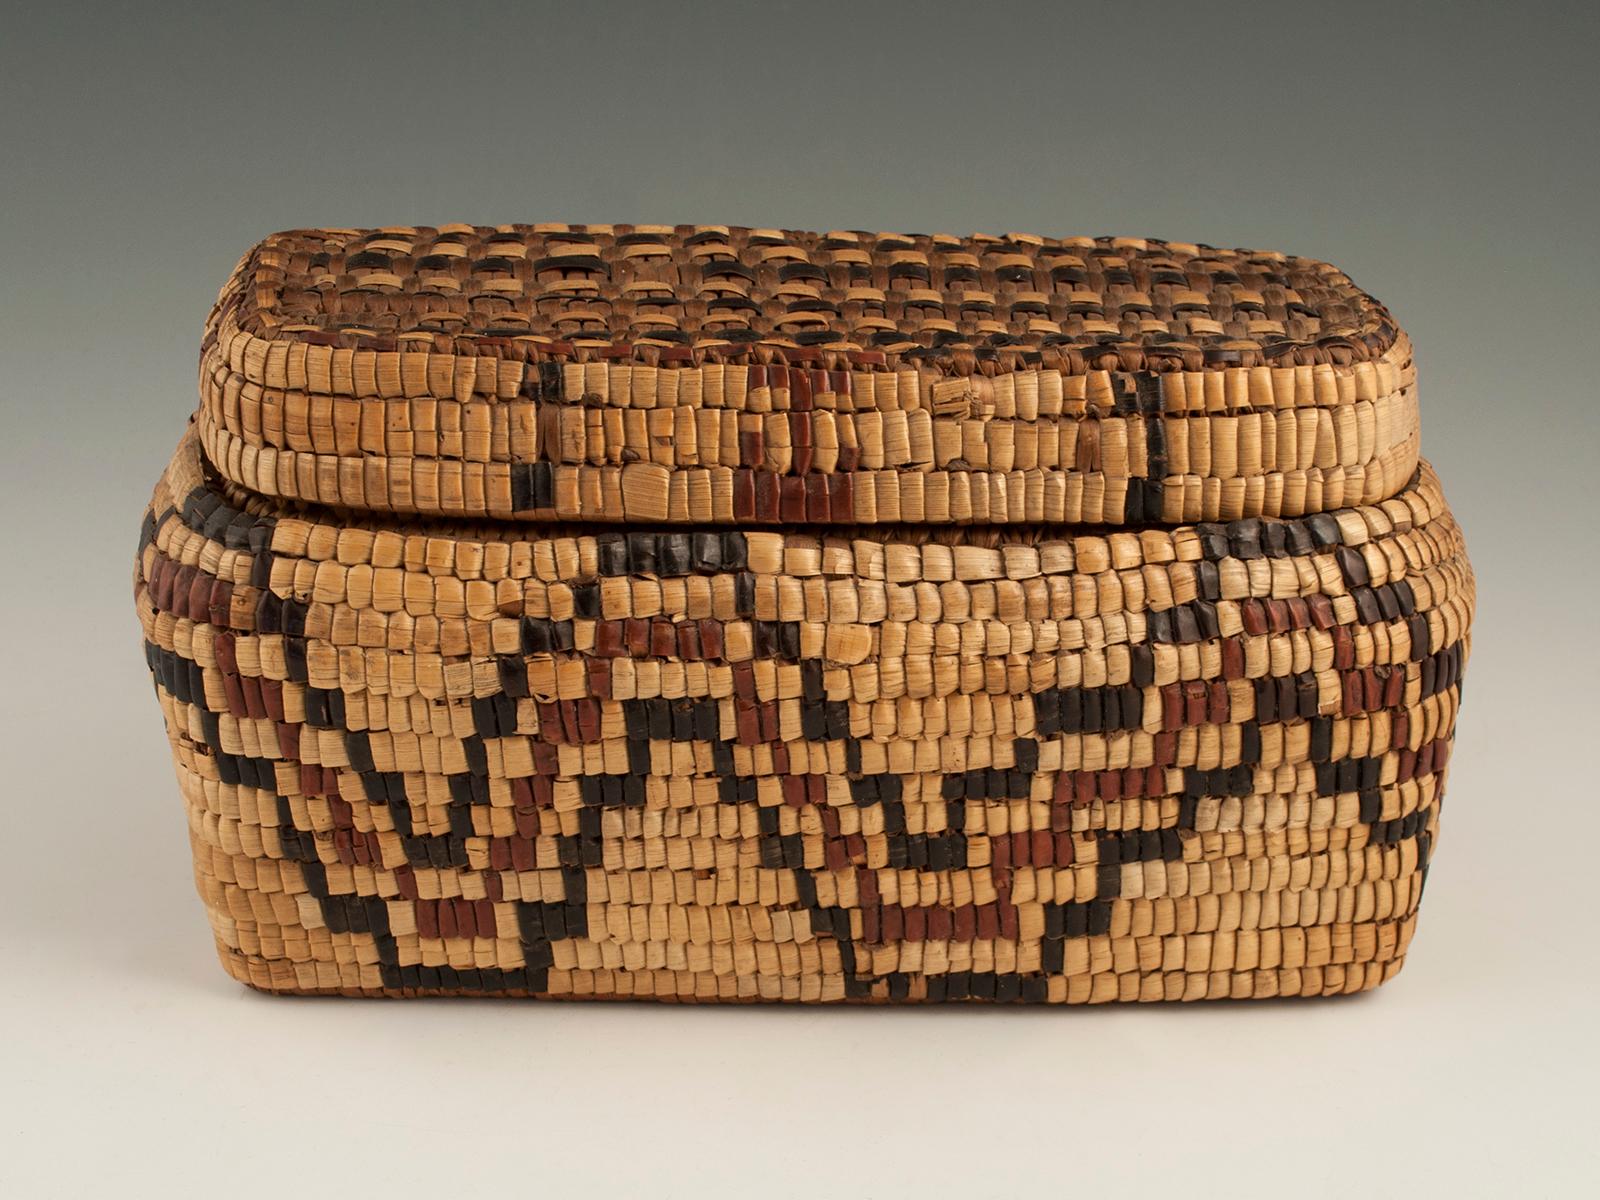 Hand-Woven Late 19th-Early 20th Century Tribal Native American Columbia River Basket